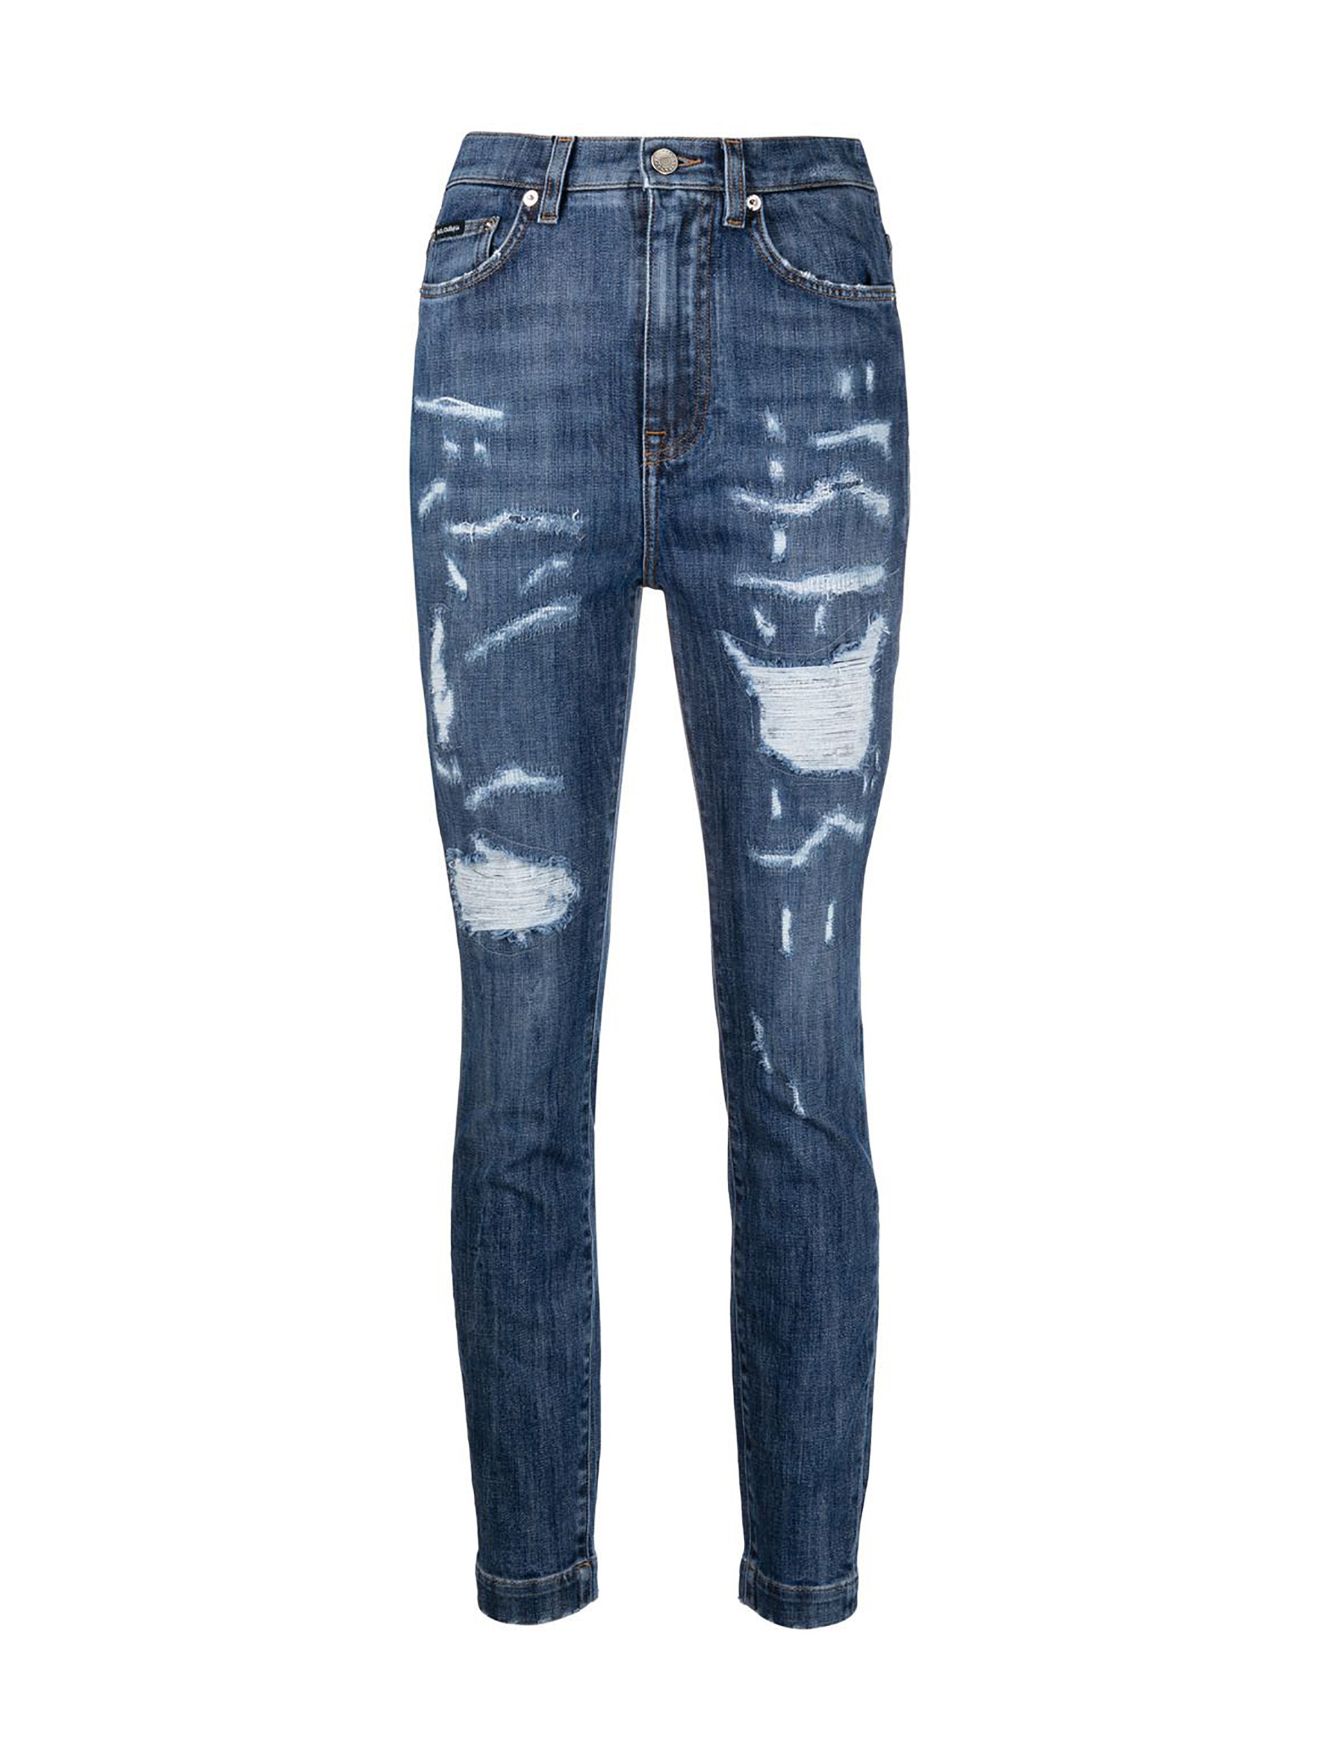 Dolce & Gabbana ripped high-waisted skinny jeans blue | MODES